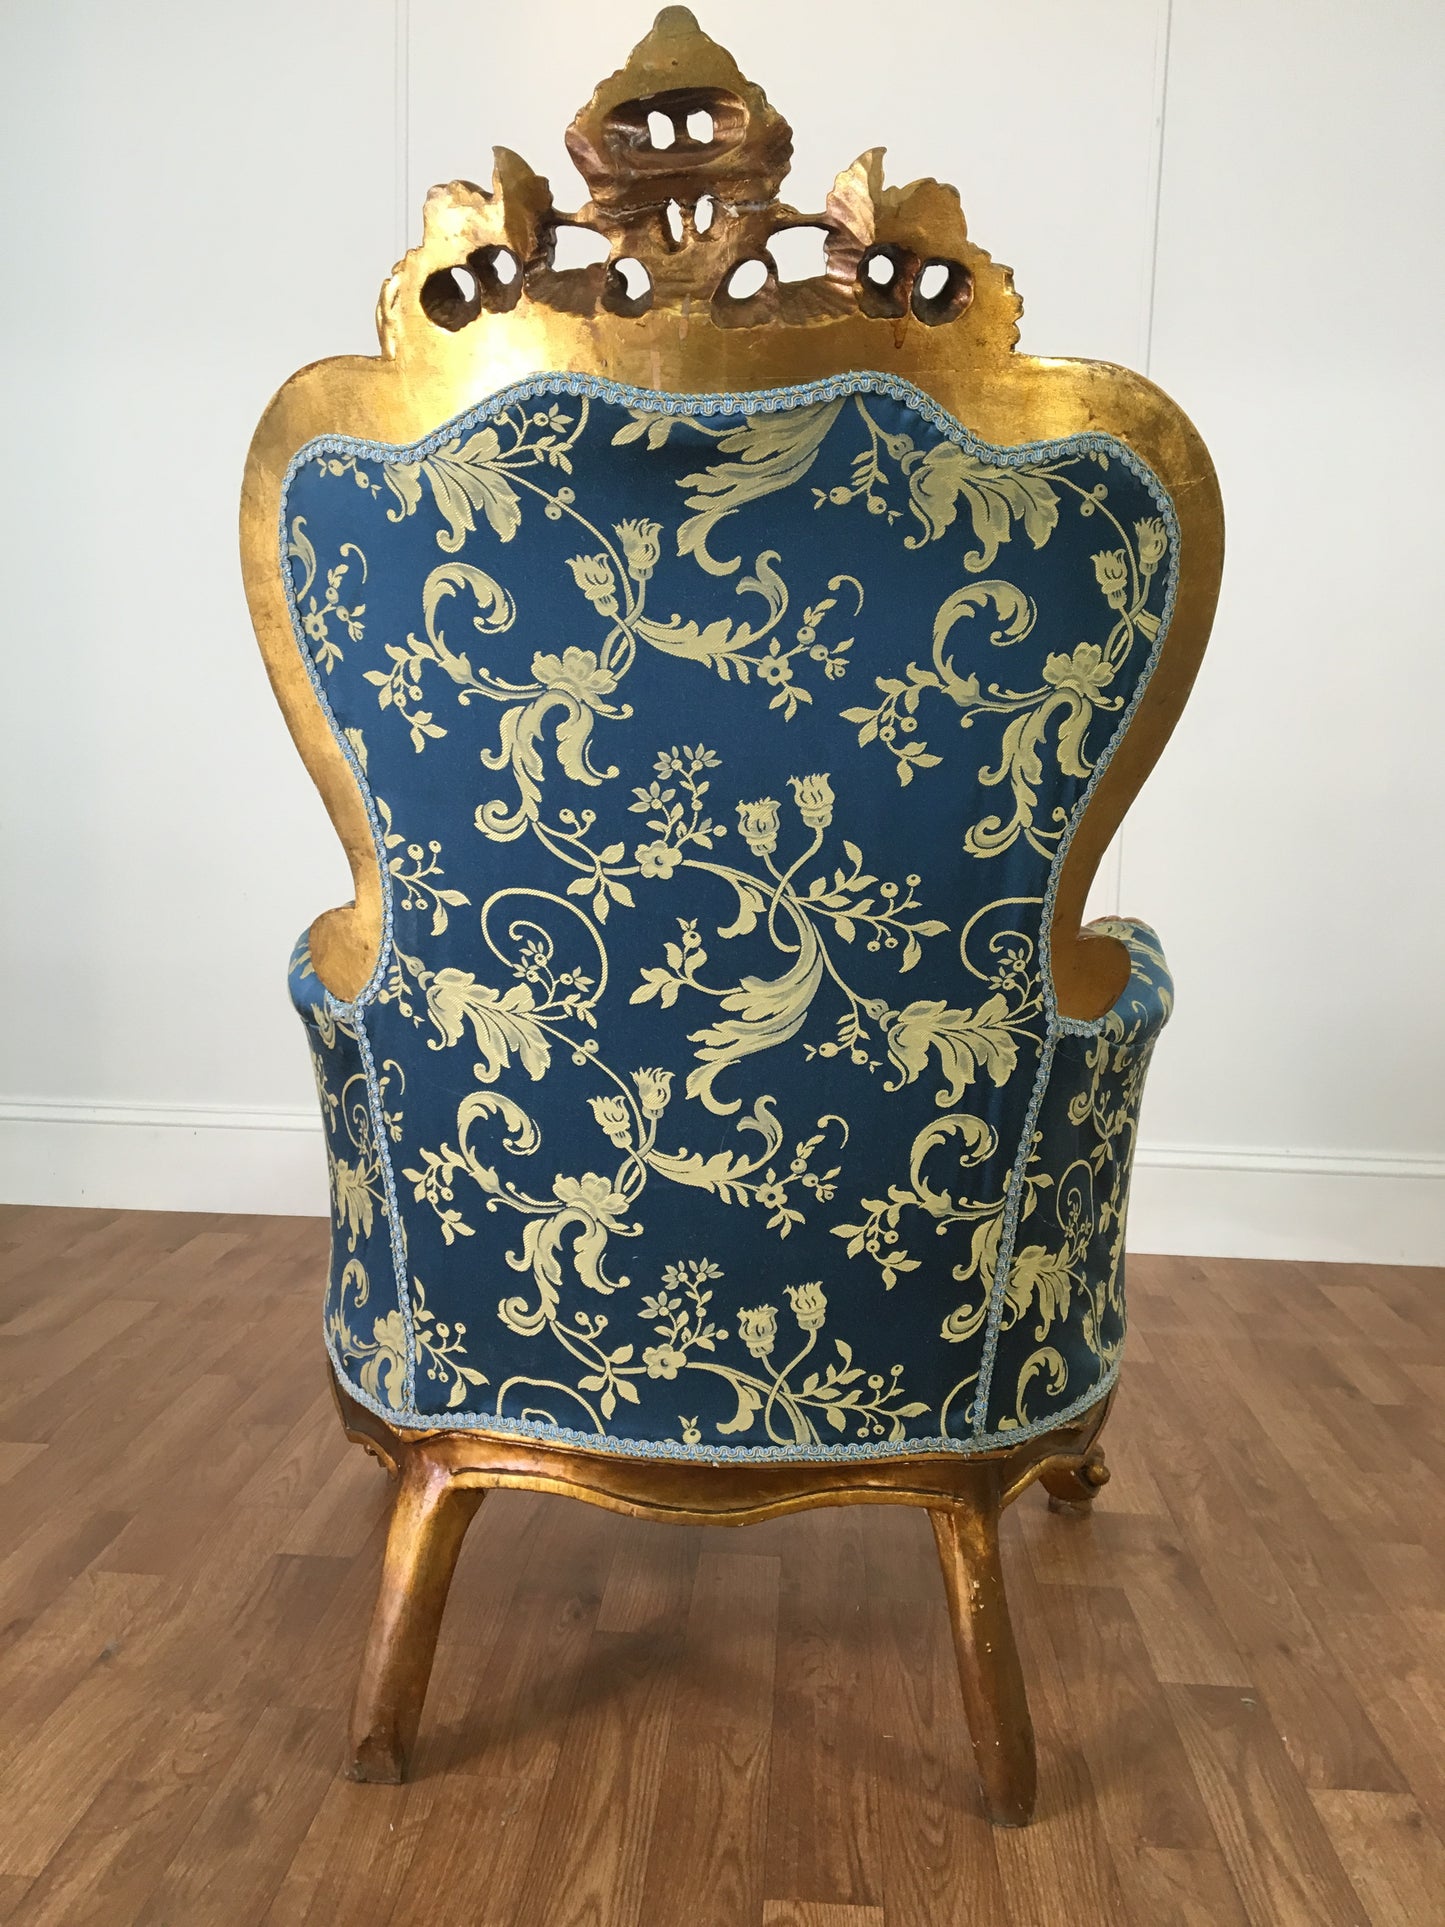 ORNATE VICTORIAN BLUE AND GOLD WINGBACK CHAIR